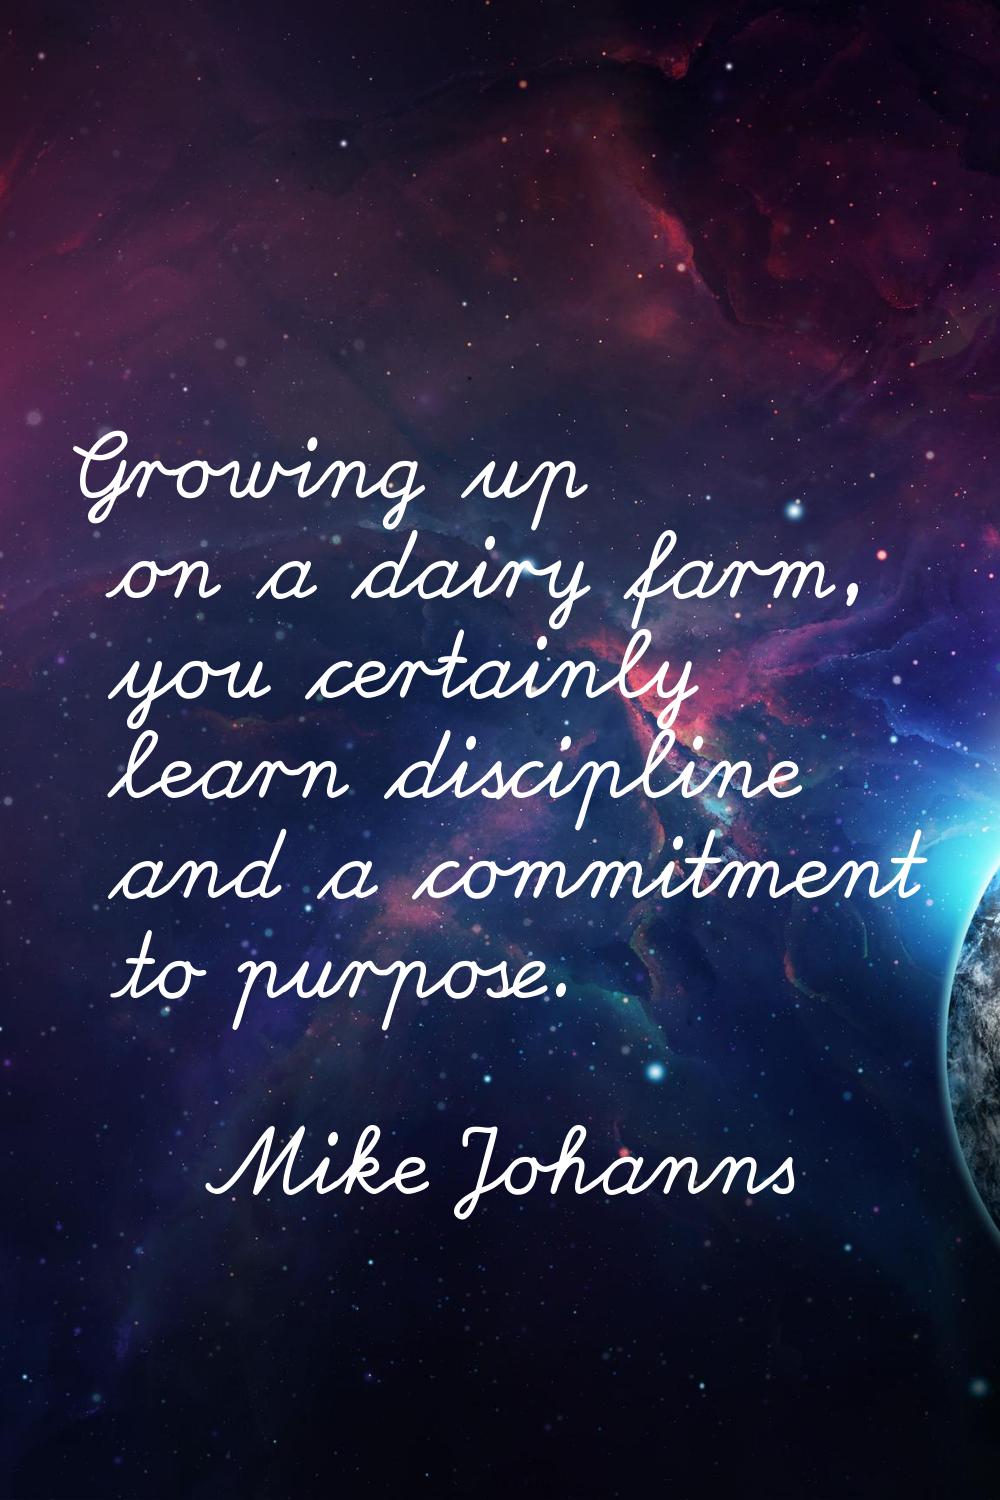 Growing up on a dairy farm, you certainly learn discipline and a commitment to purpose.